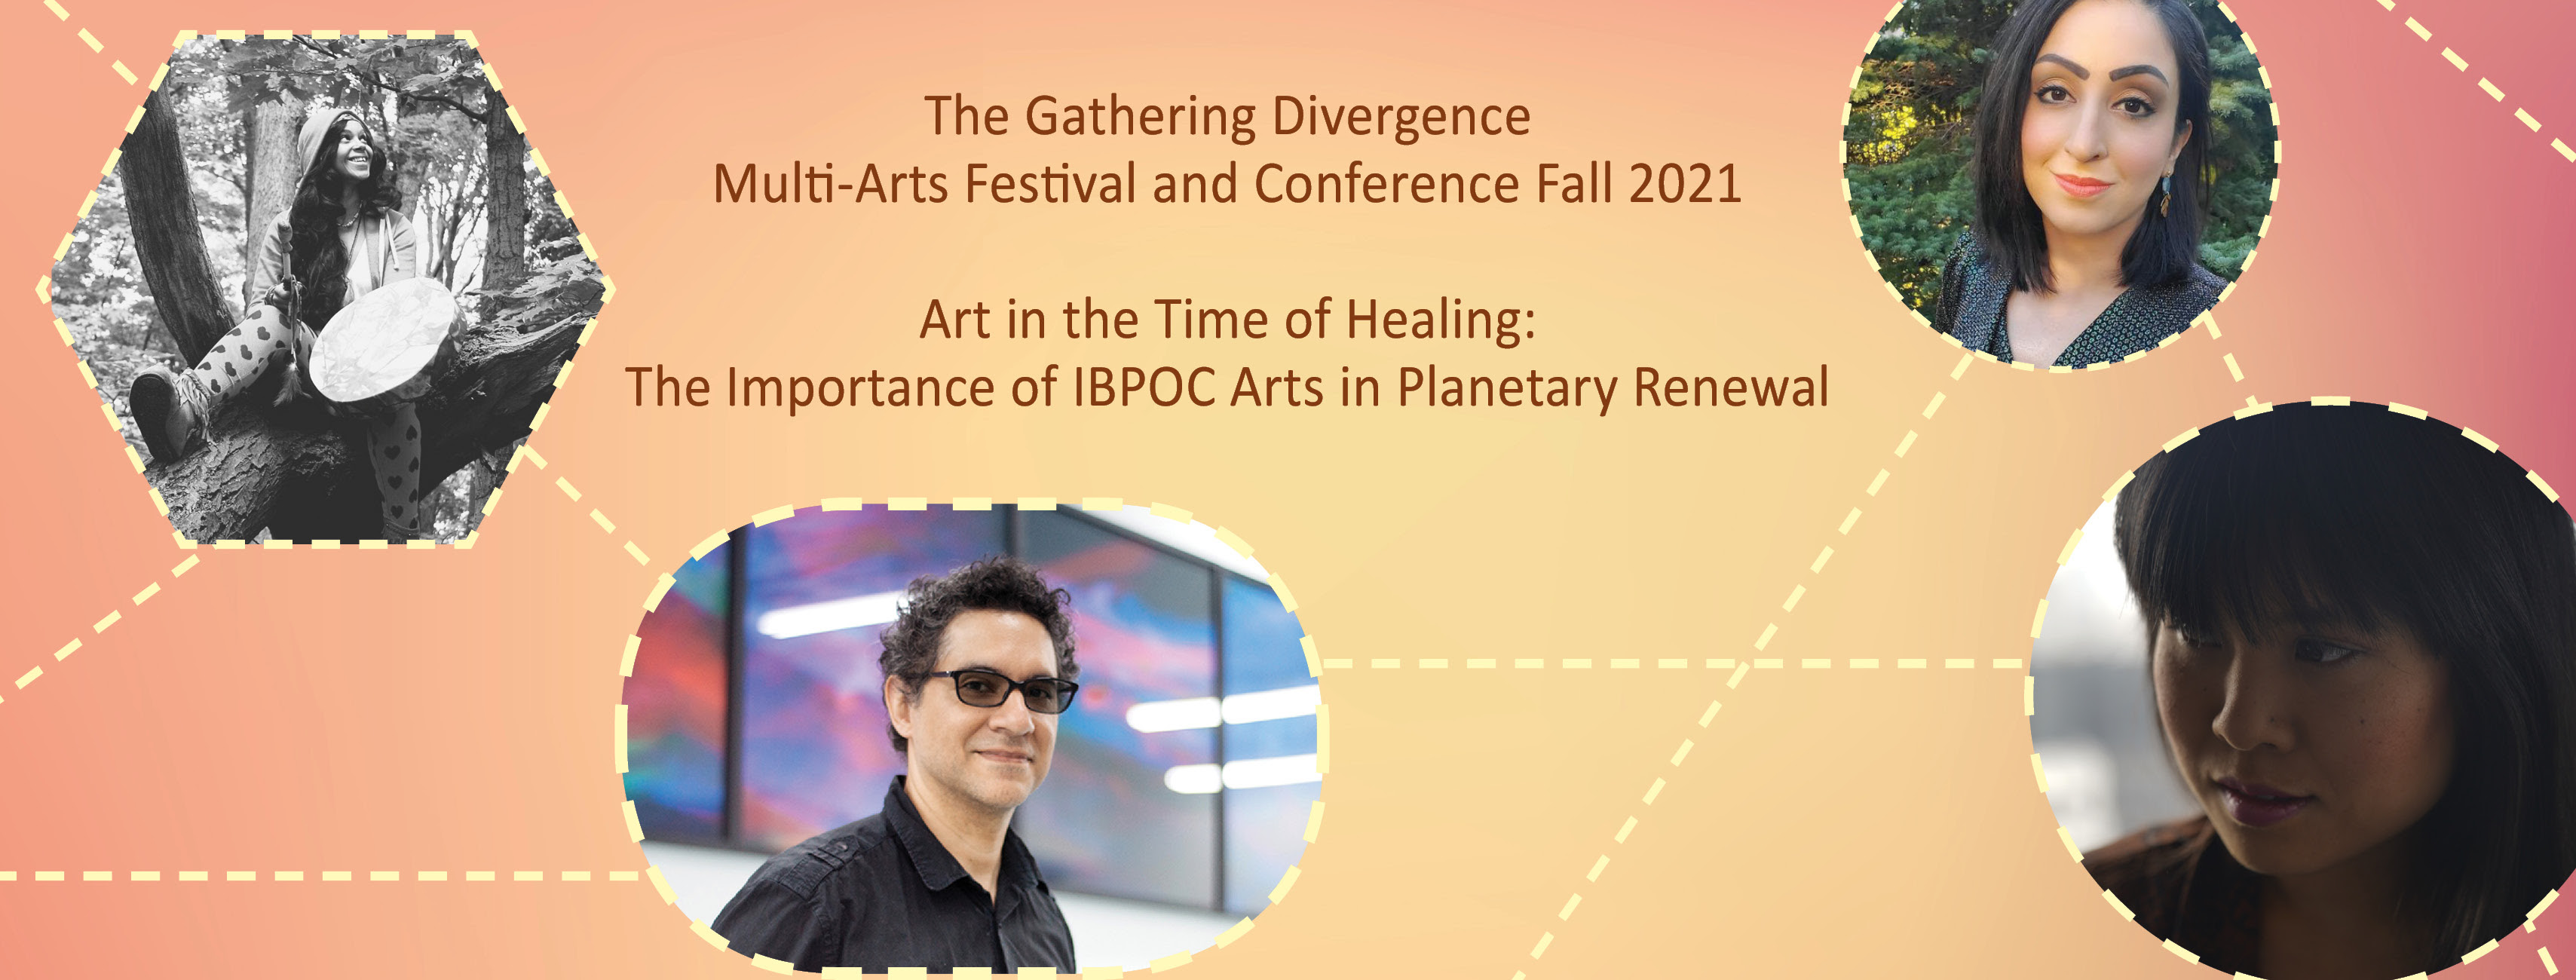 Text: Gathering Divergence Multi-Arts Festival & Conference Fall 2021 | Art in the Time of Healing: The Importance of IBPOC Arts in Planetary and four photos of artists 